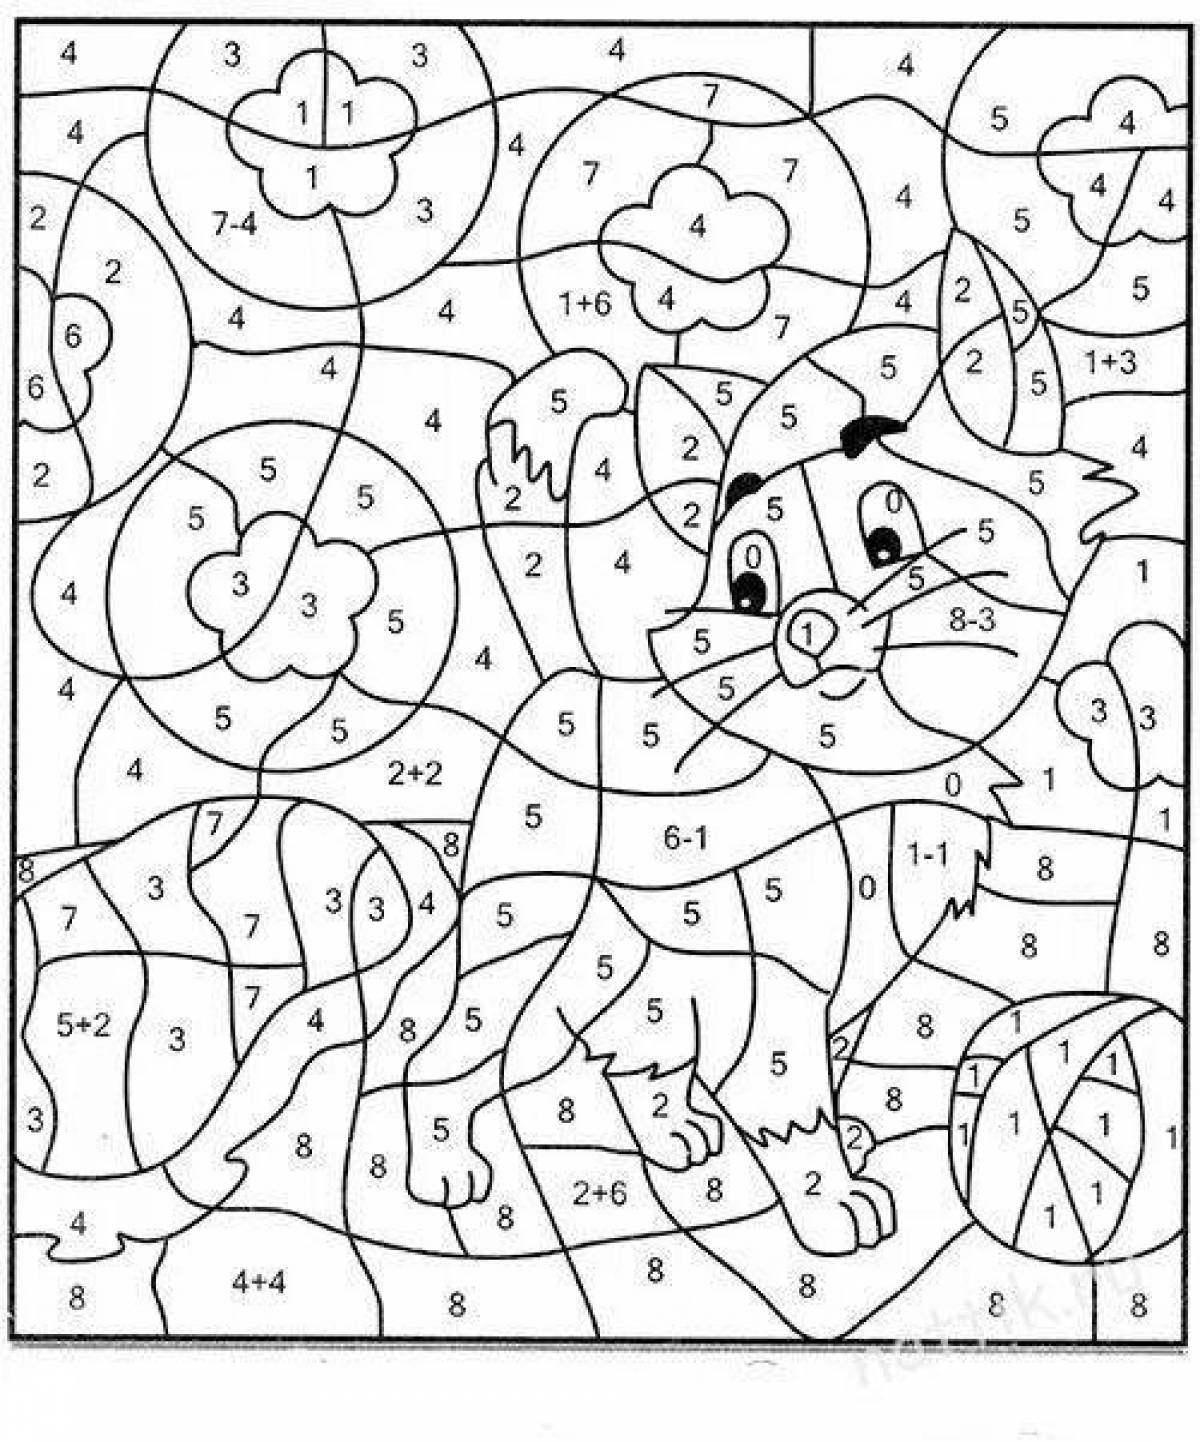 Fun cat coloring by numbers